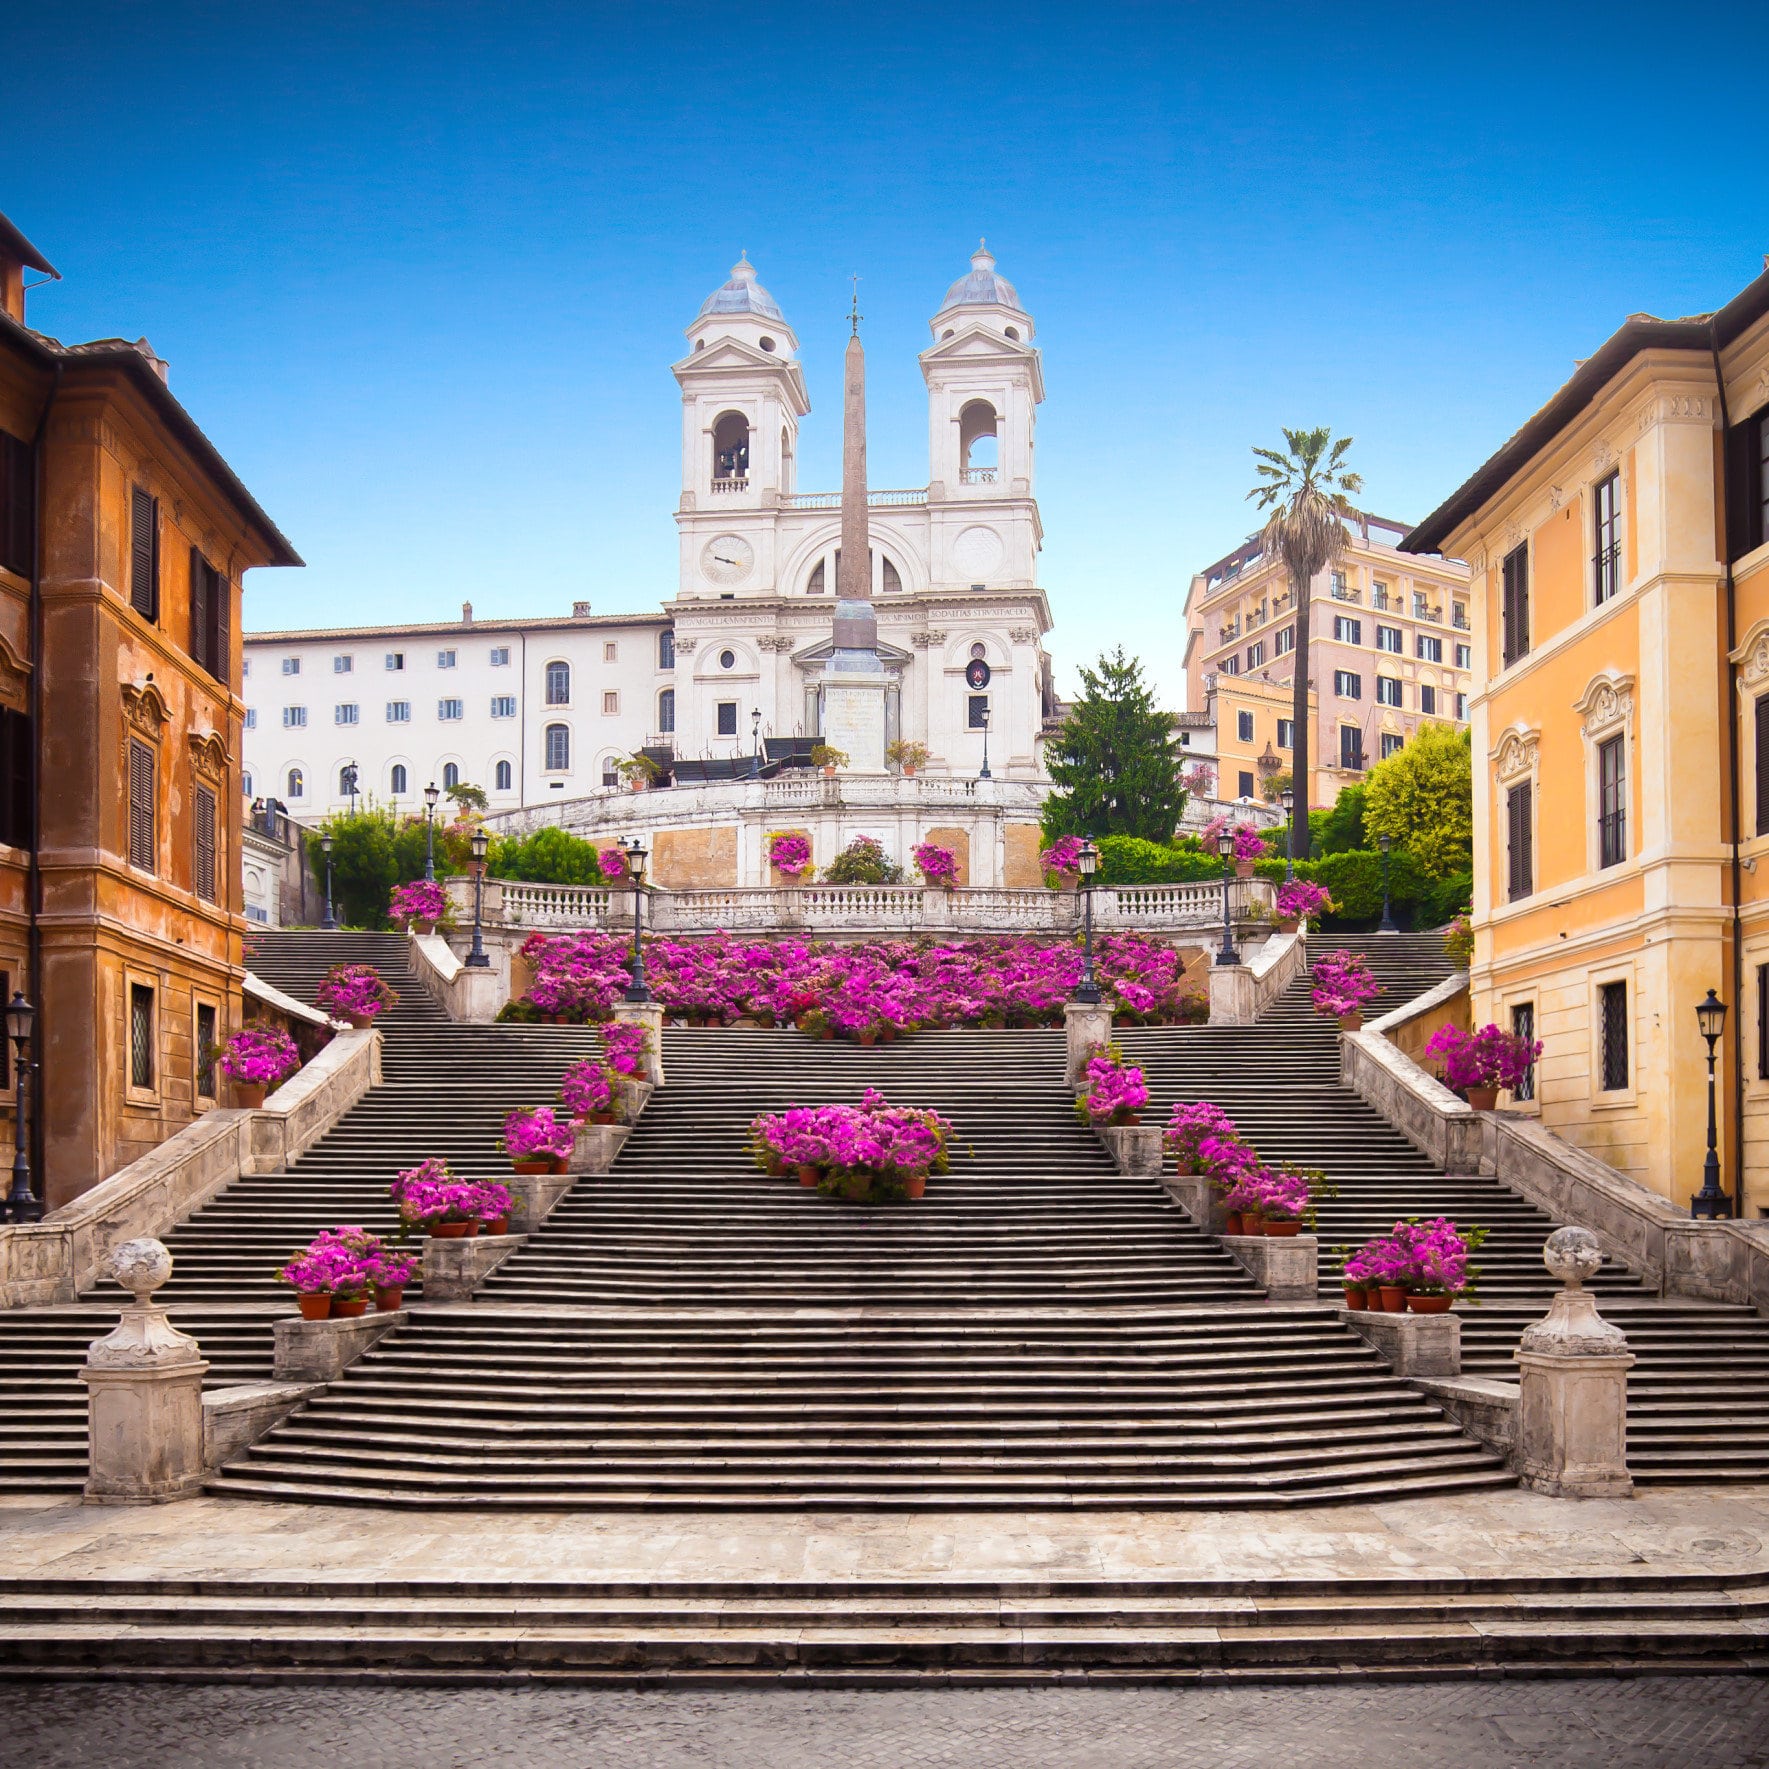 All 100+ Images where would you find the spanish steps Latest